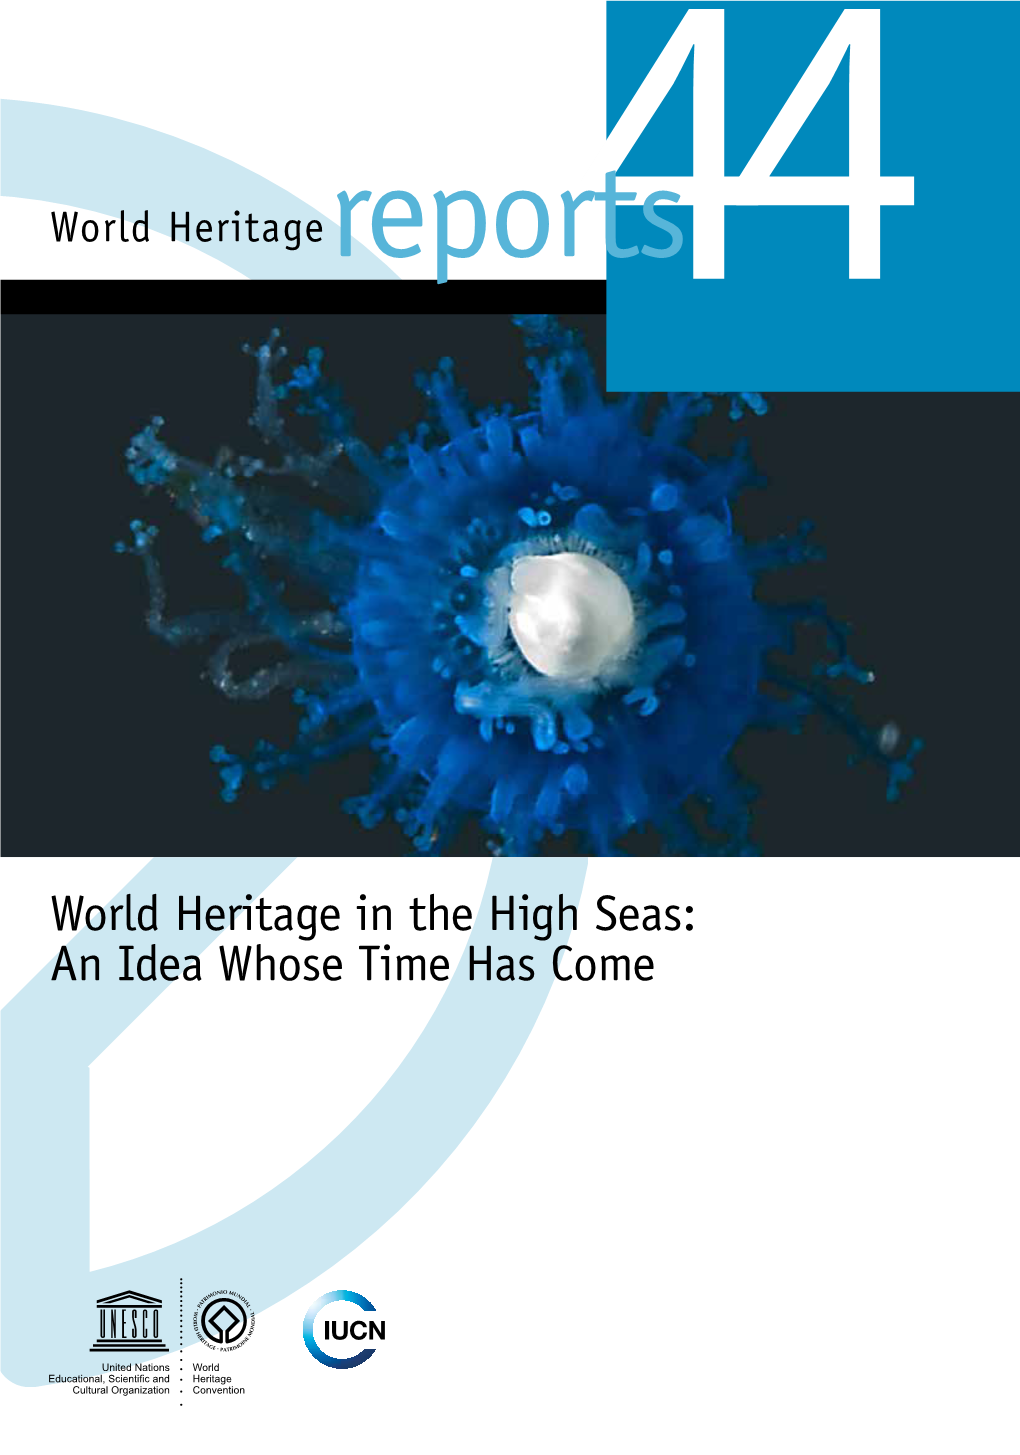 World Heritage in the High Seas: an Idea Whose Time Has Come